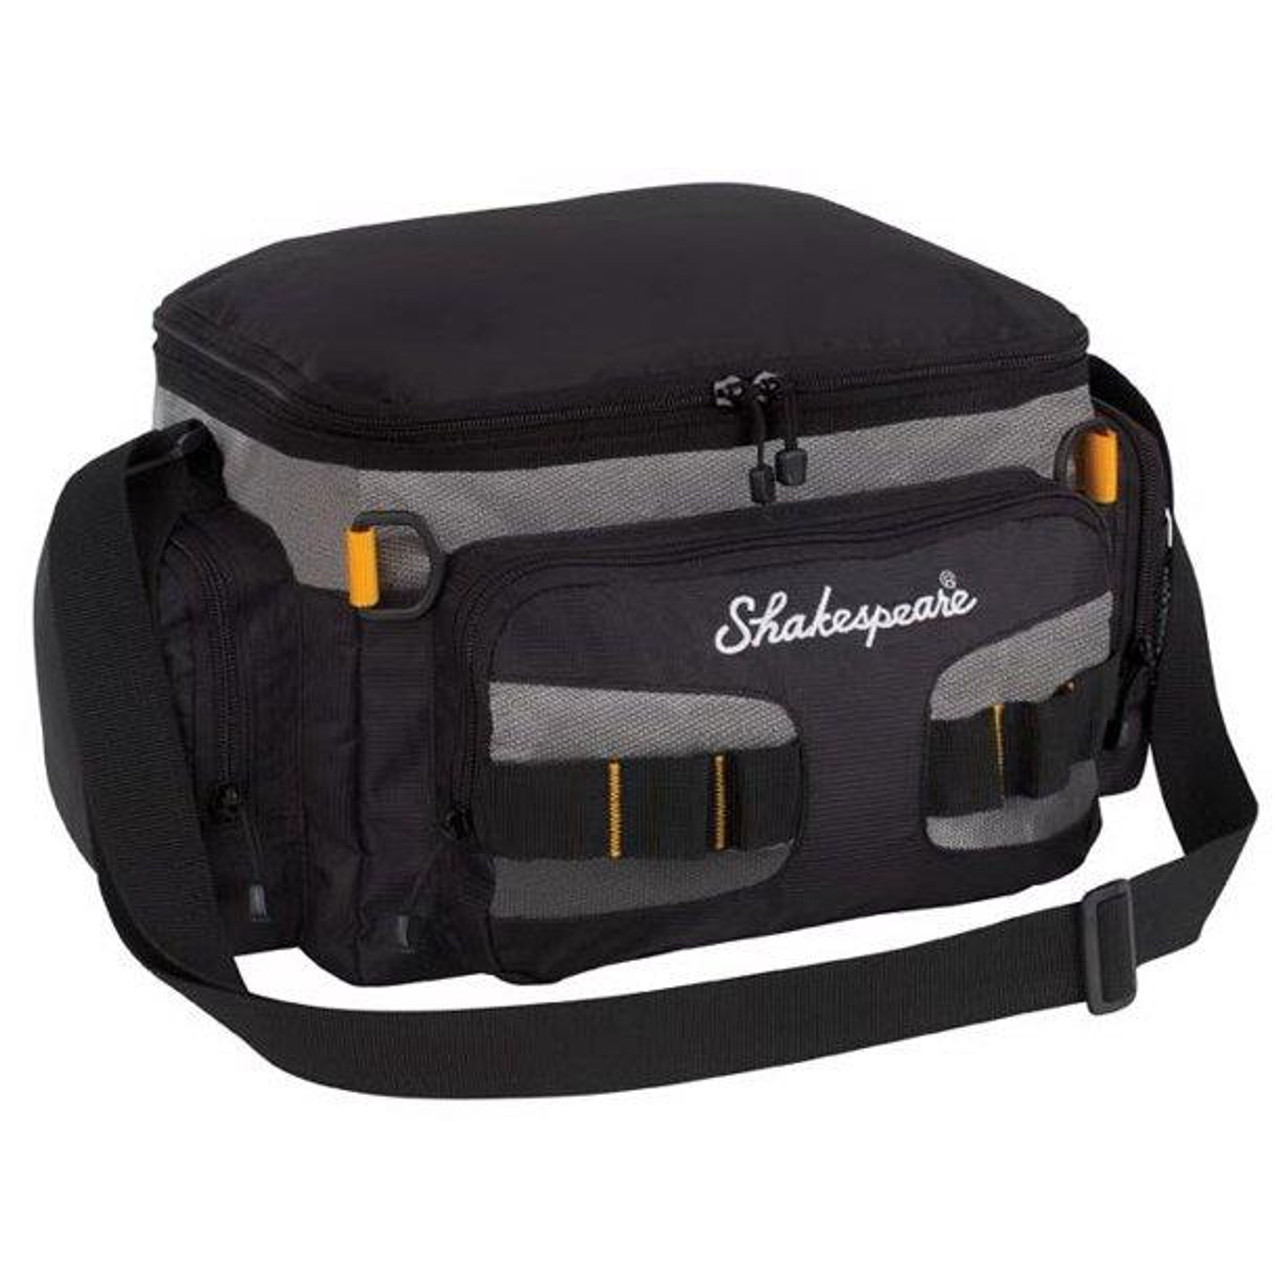 Shakespeare Small Tackle Bag - 2 Boxes - Dance's Sporting Goods